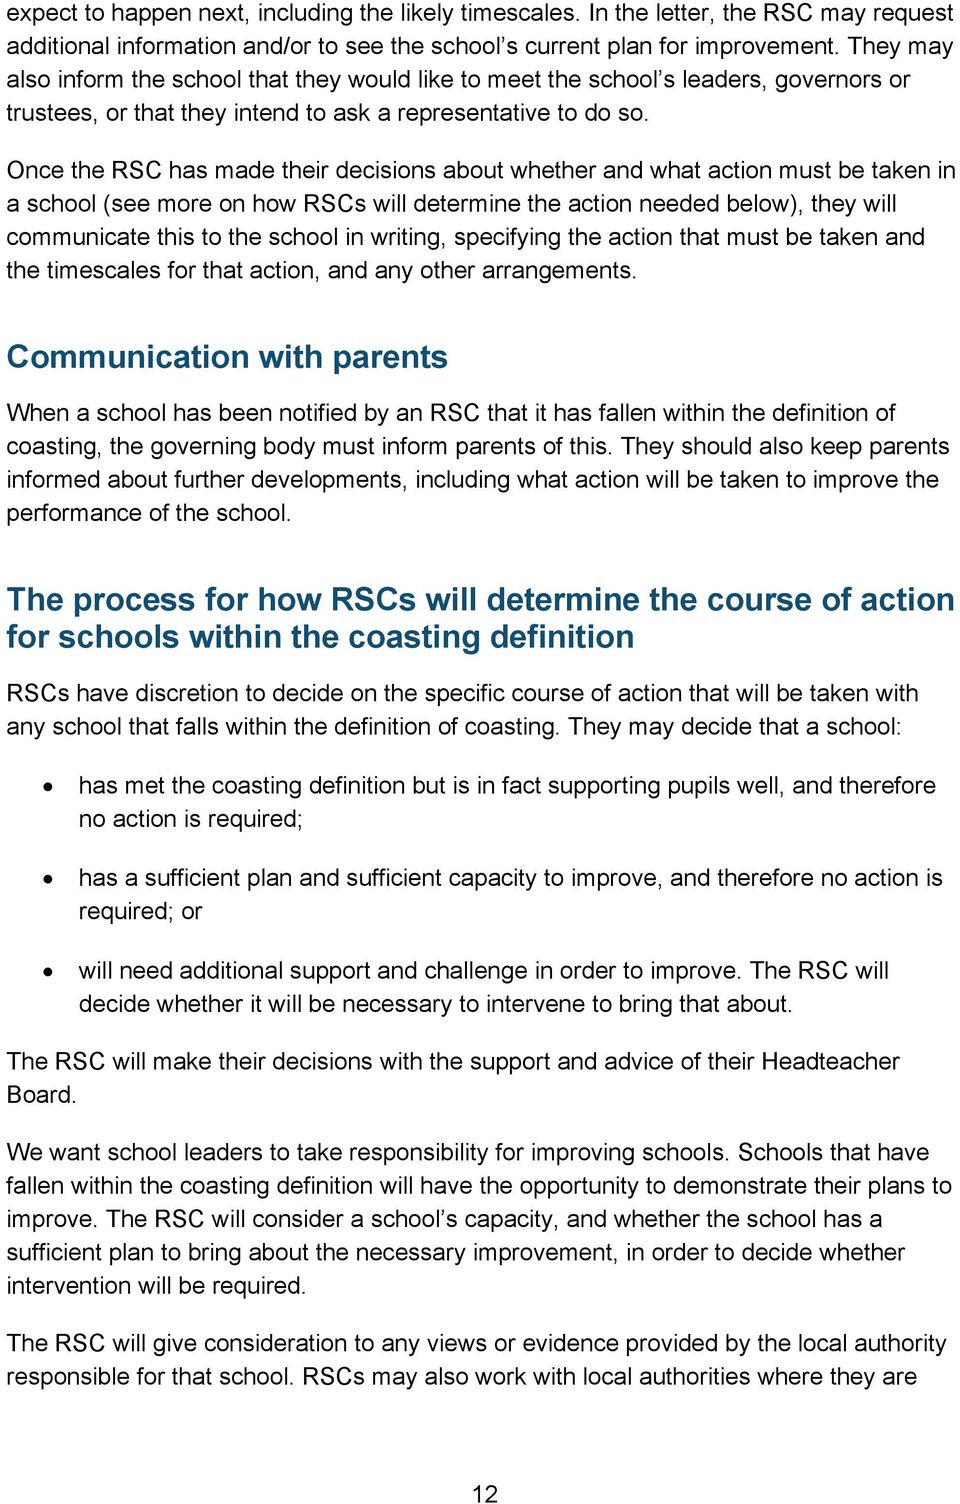 Once the RSC has made their decisions about whether and what action must be taken in a school (see more on how RSCs will determine the action needed below), they will communicate this to the school